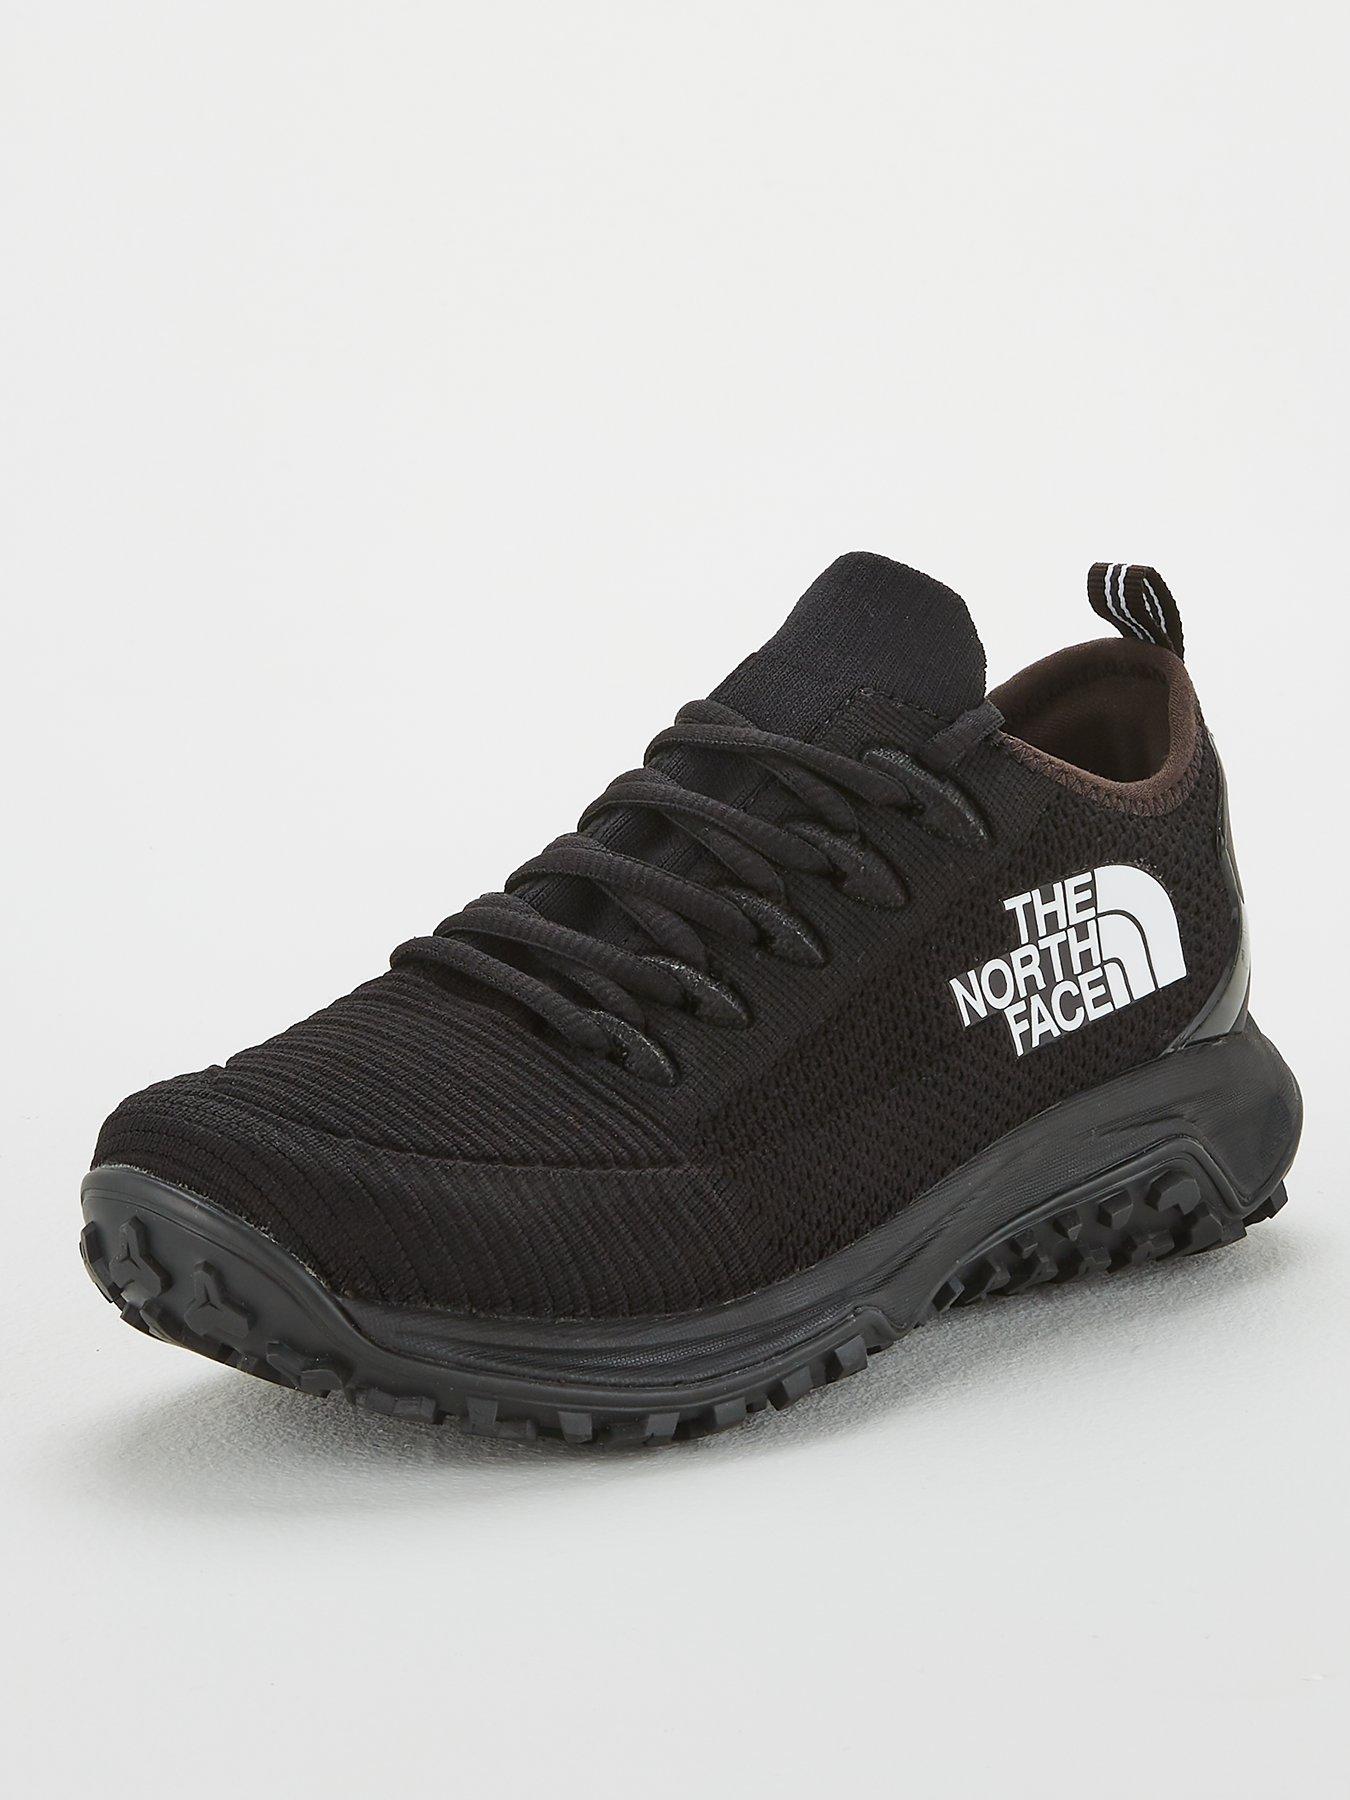 north face trainer